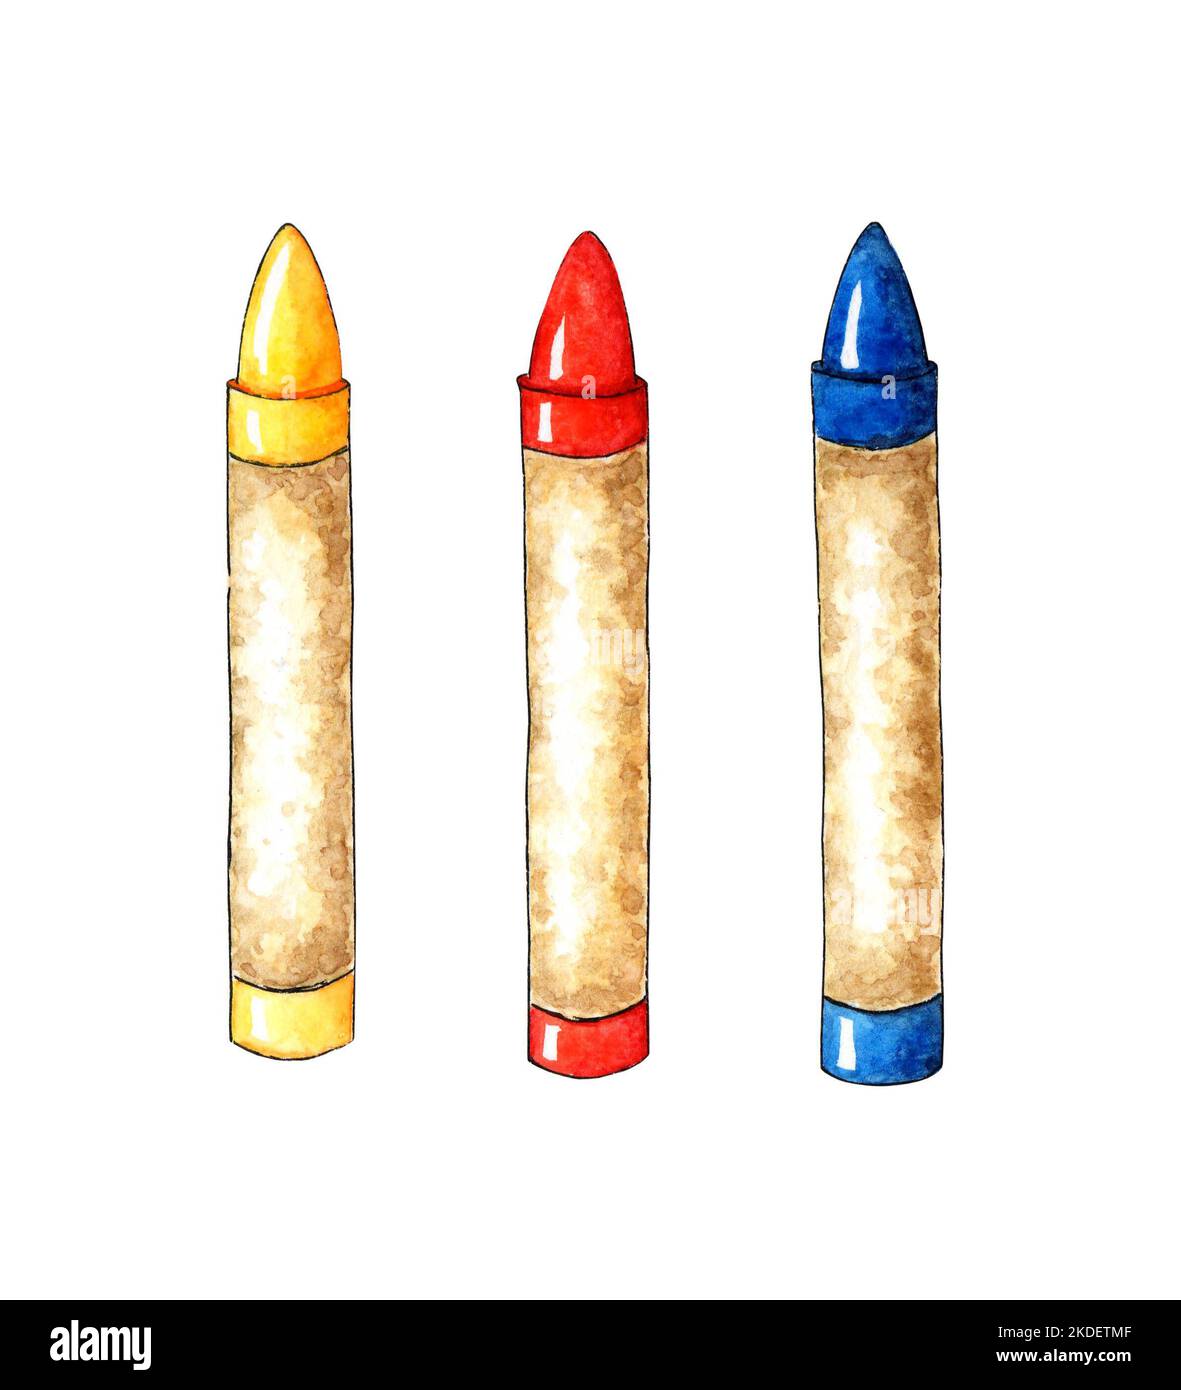 https://c8.alamy.com/comp/2KDETMF/watercolor-illustration-set-of-colored-wax-crayons-back-to-school-writing-supplies-for-posters-posters-postcards-holiday-decor-isolated-on-whit-2KDETMF.jpg